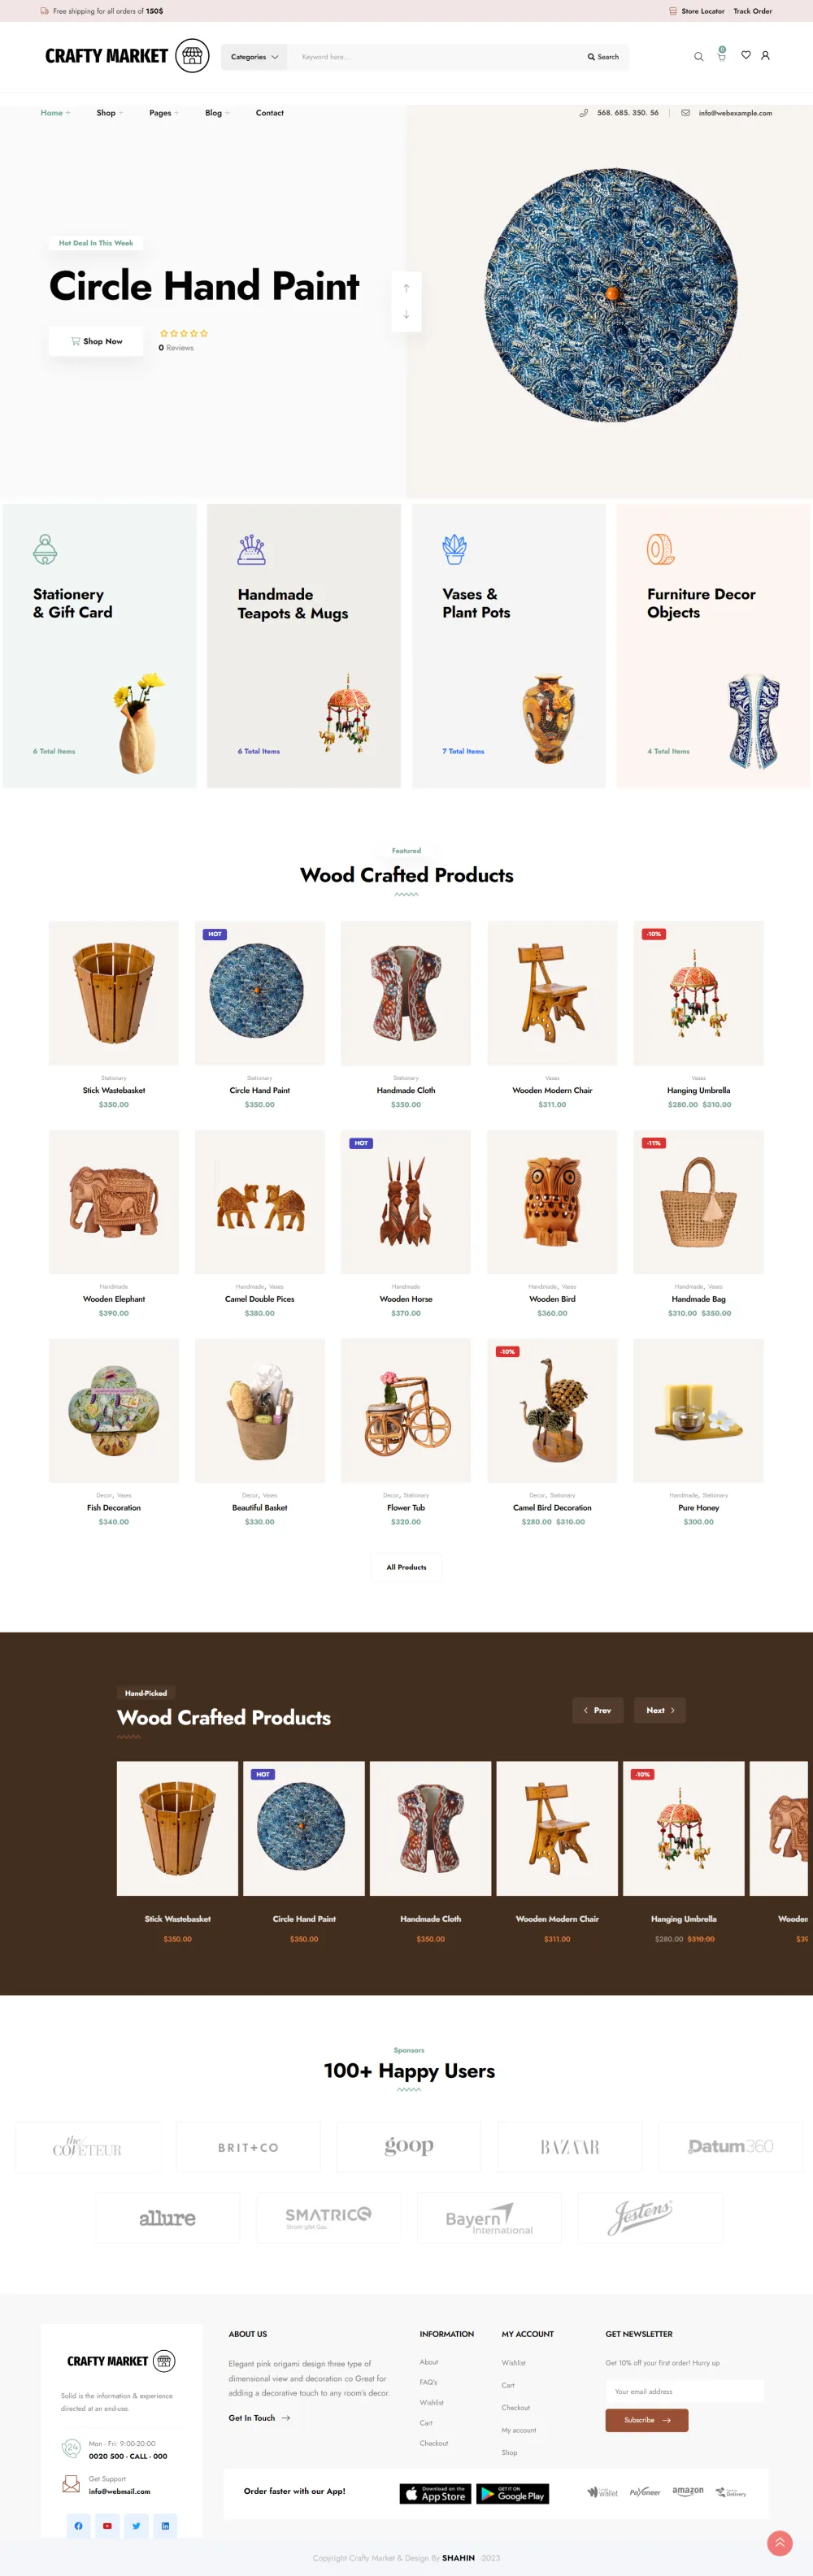 Crafty Market crafts products ecommerce website in wordpress